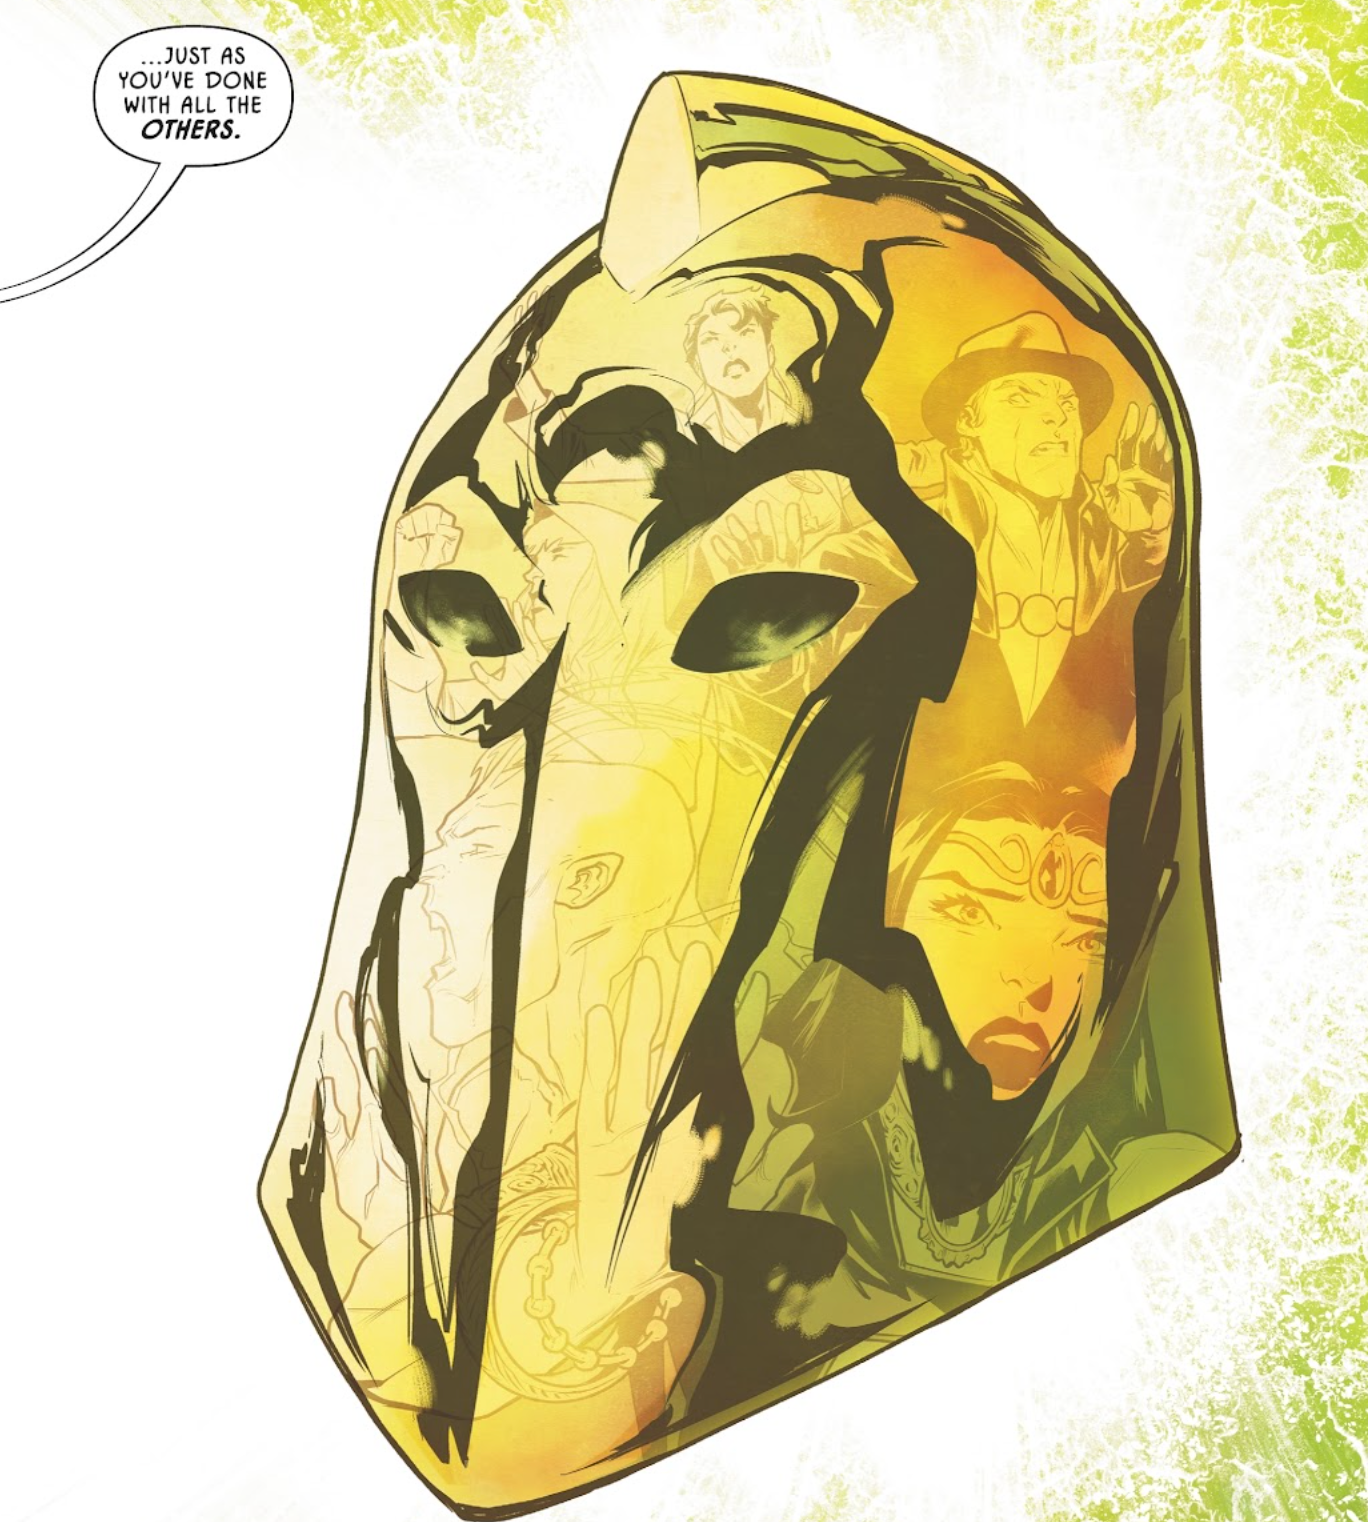 DC Makes a Major Change to Doctor Fate's Helmet